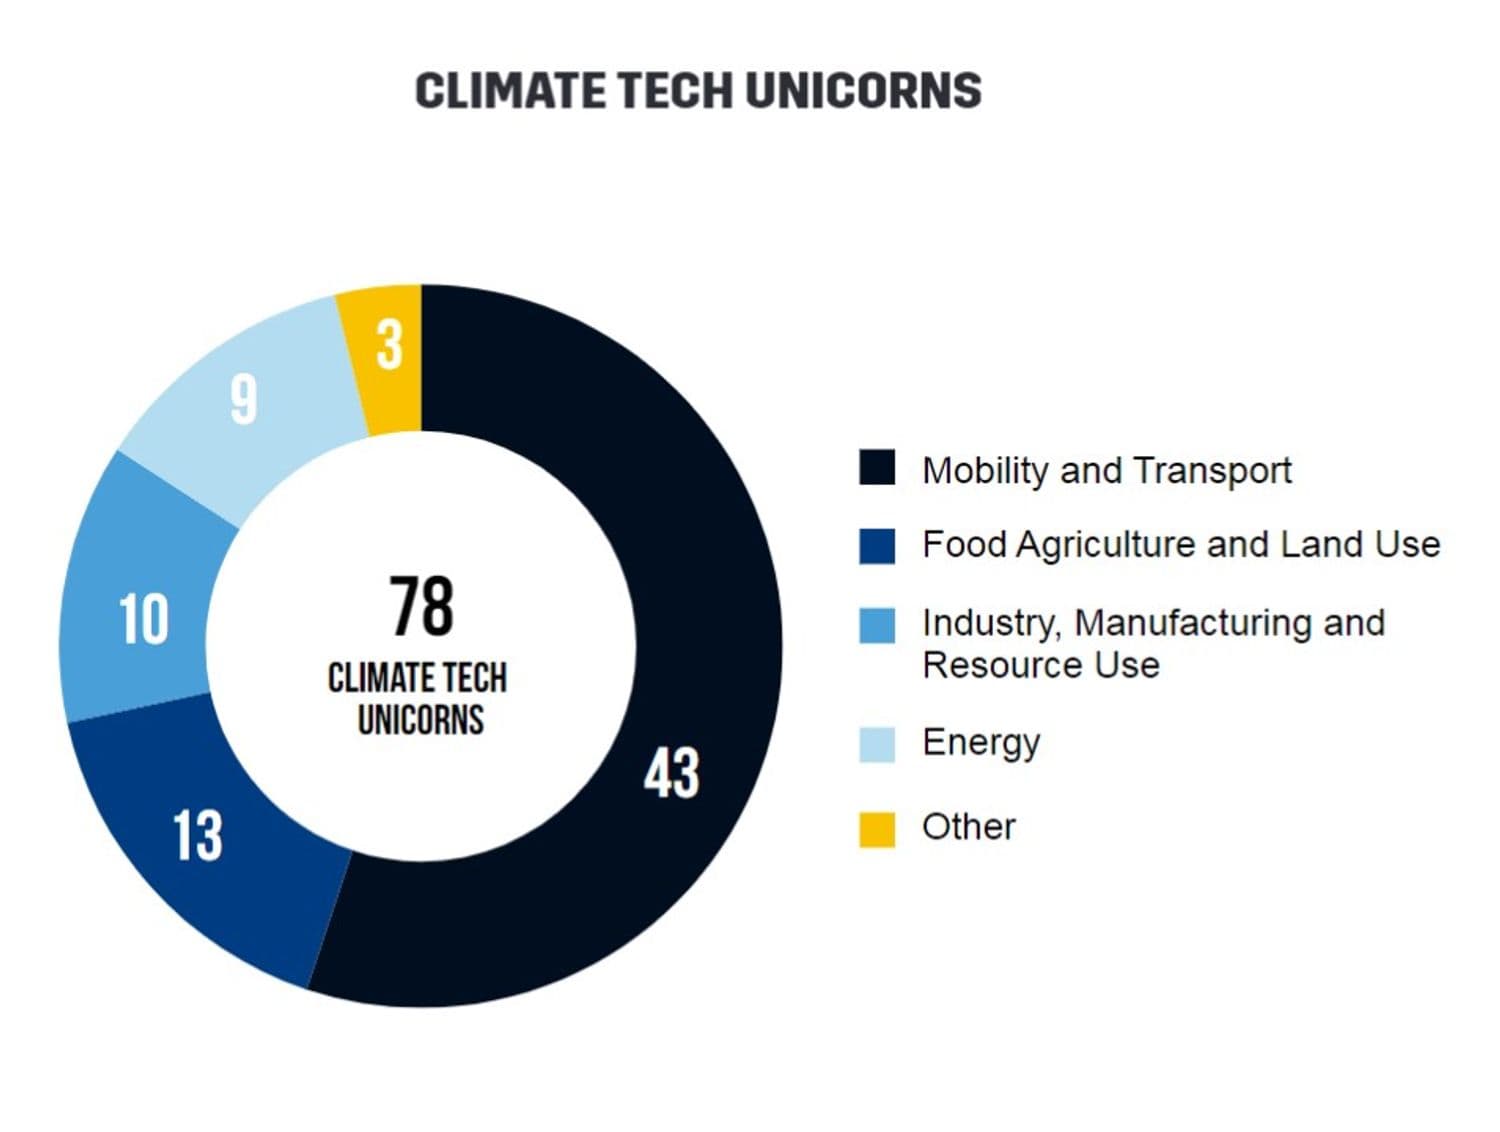 Total Number of Climate Tech Unicorns in the World, by Sector